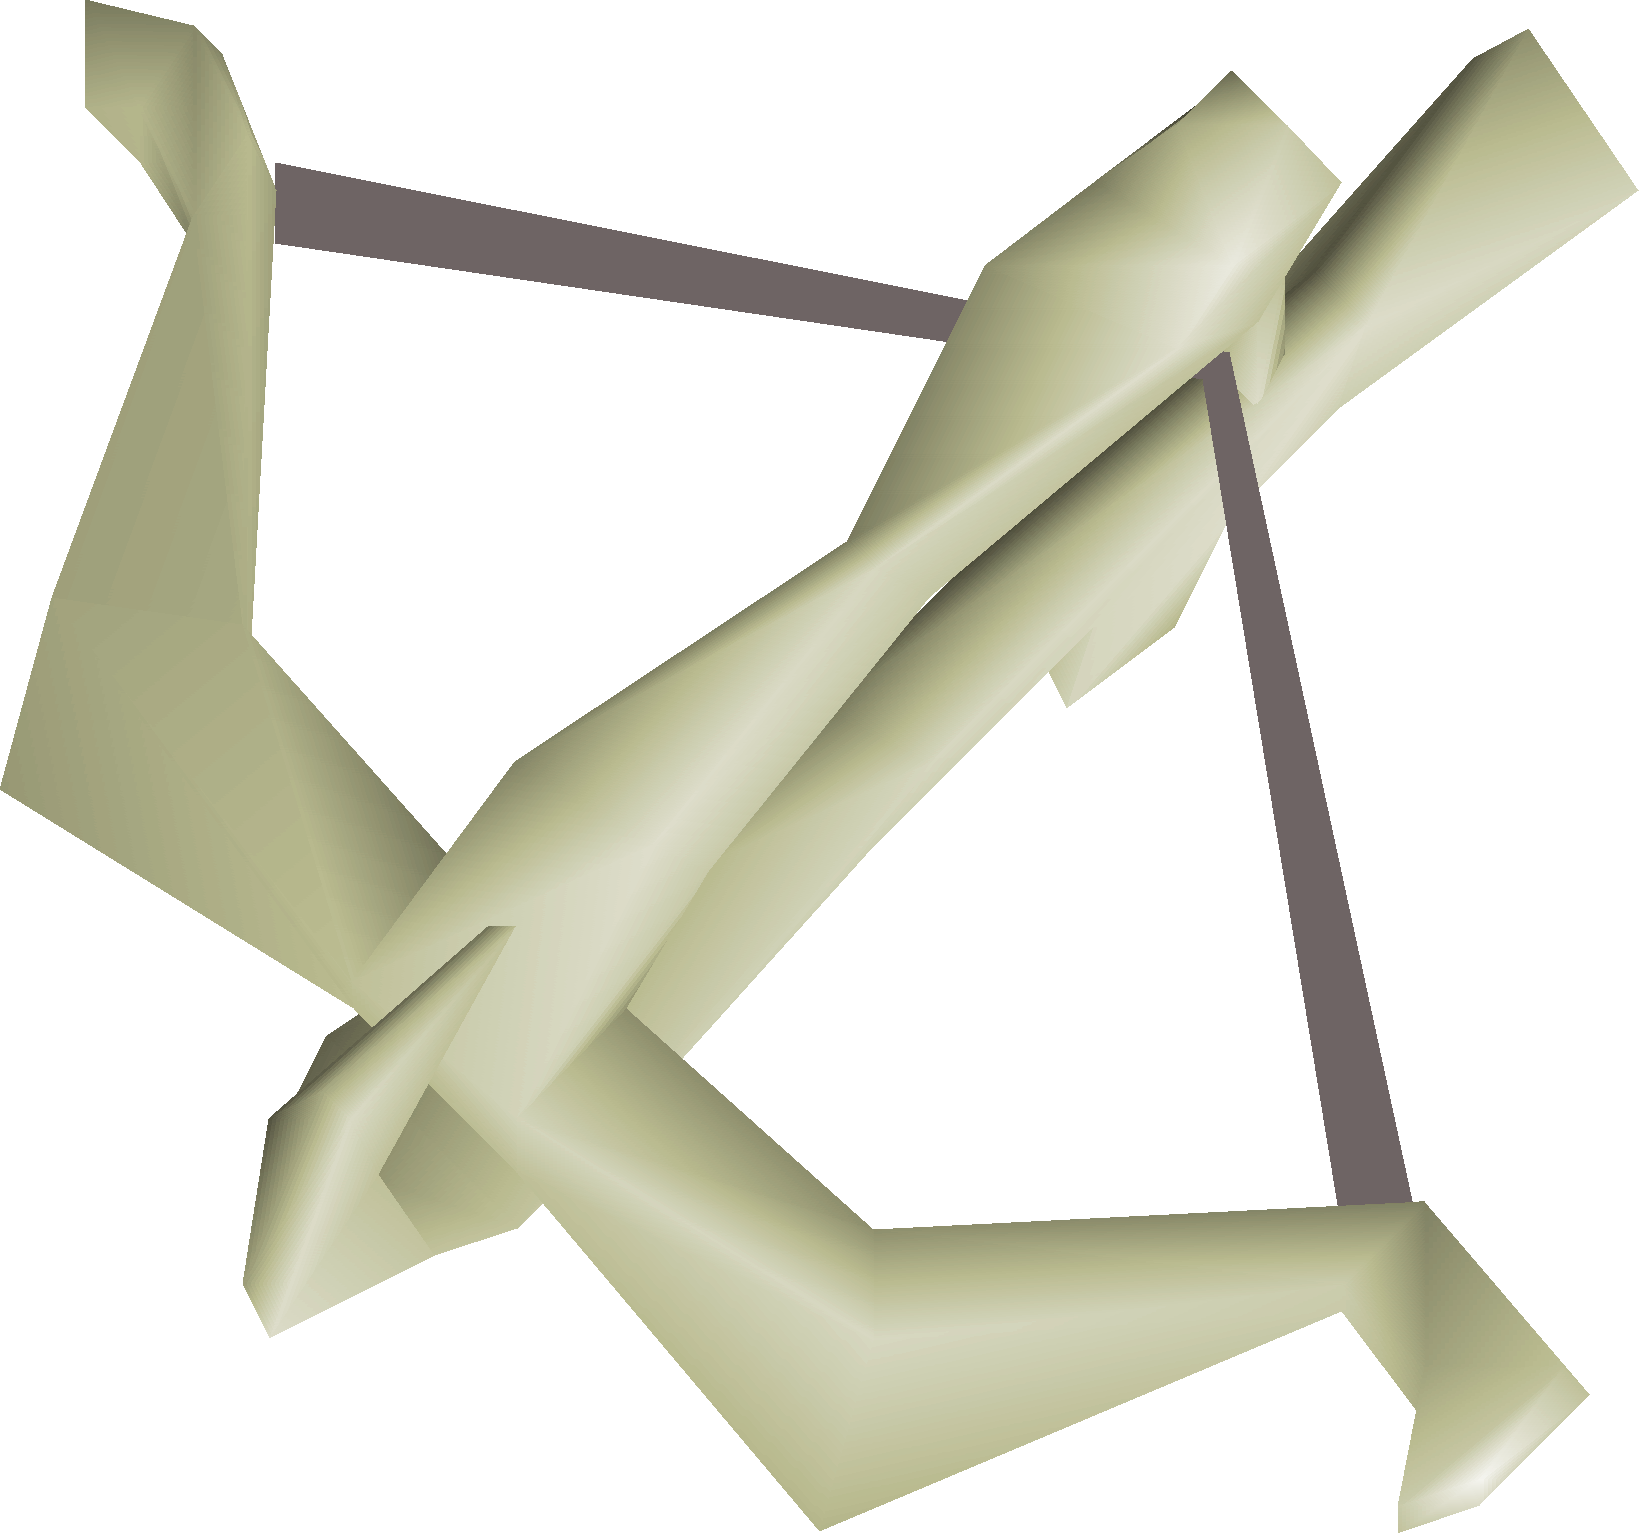 Dorgeshuun, one of the best crossbows in OldSchool Runescape